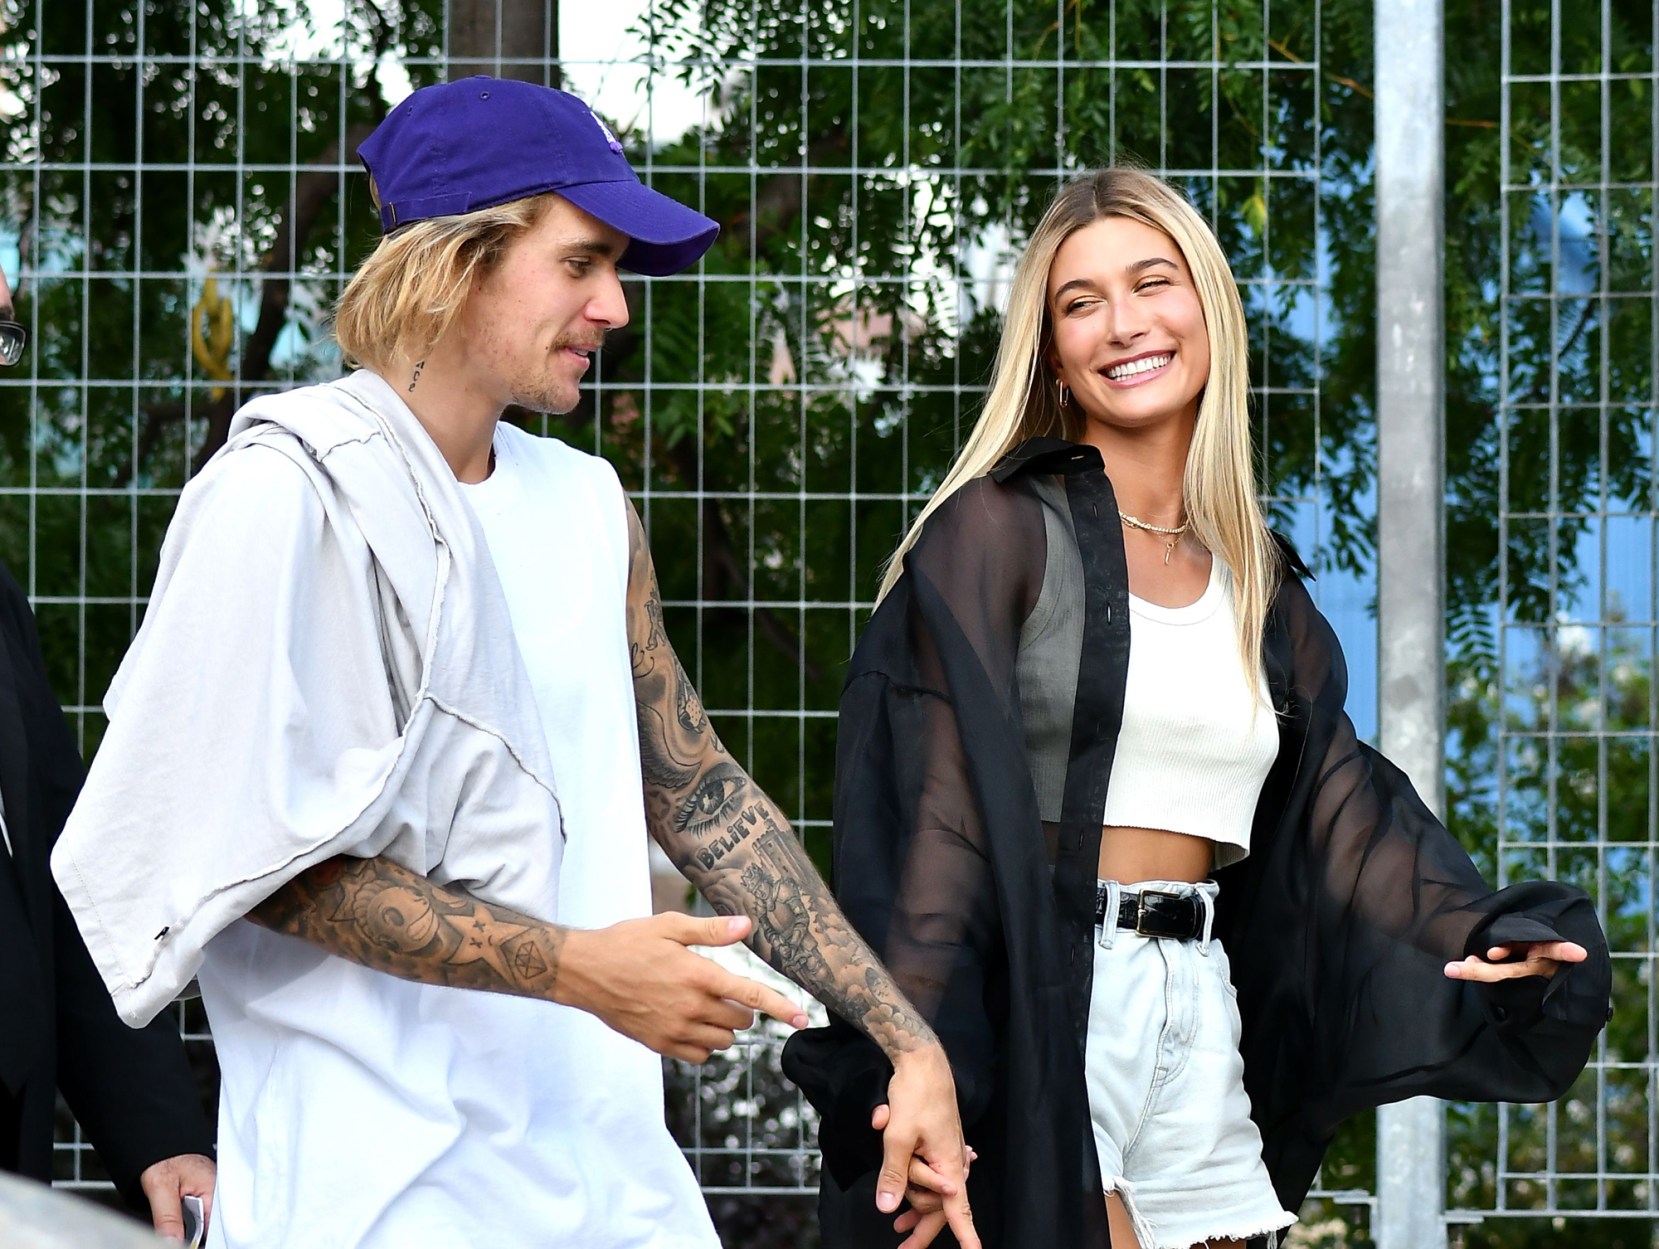 Justin Bieber's Wedding Ring Goes With His Lavish New Watch